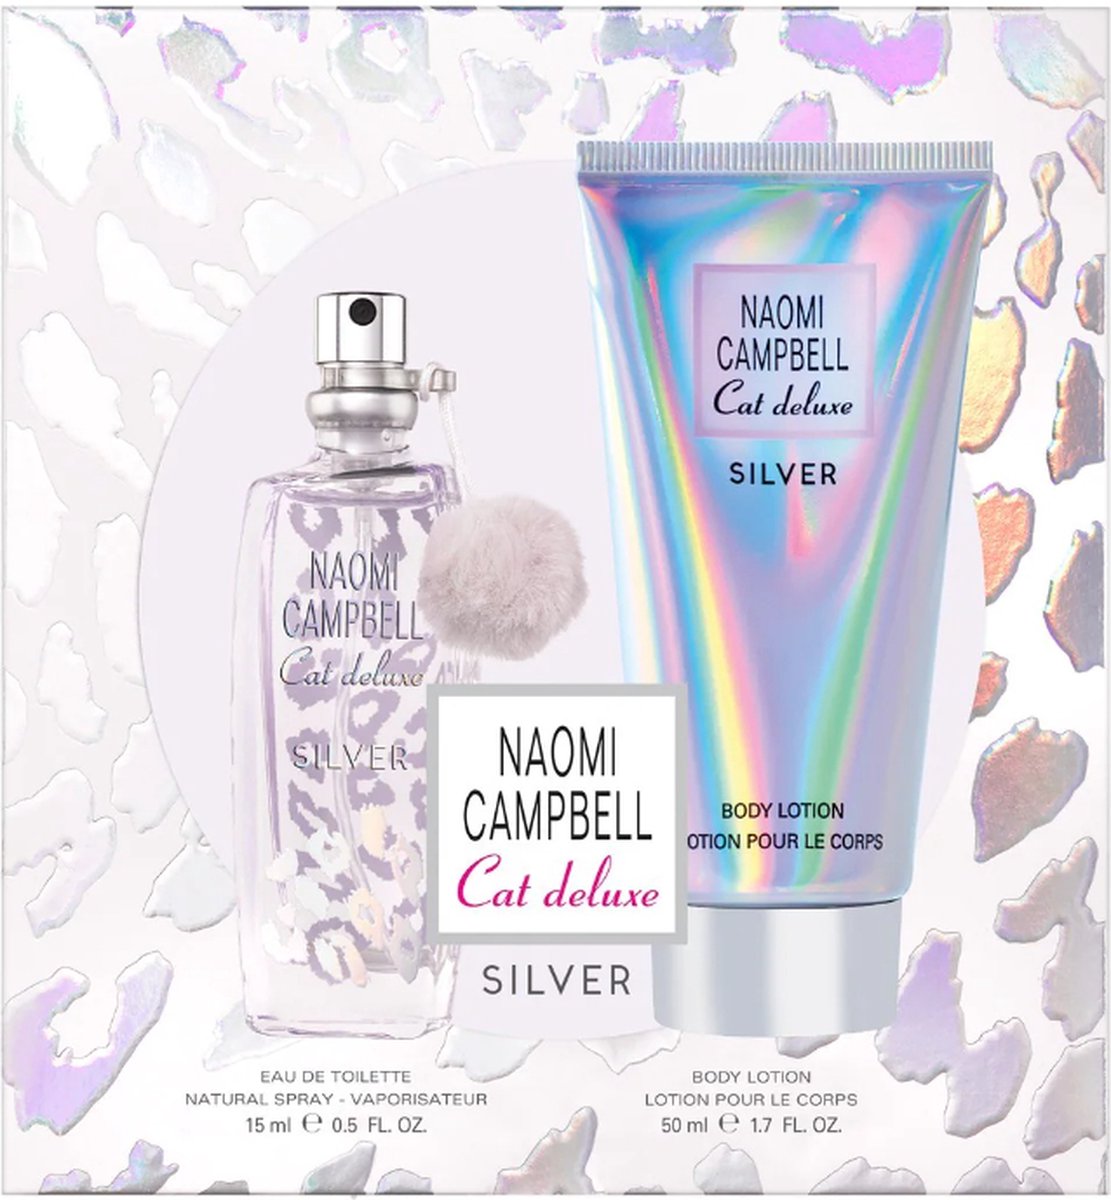 Naomi Campbell Silver Cat deluxe Giftpack - Eau De Toilette 15 ml - Body Lotion 50 ml